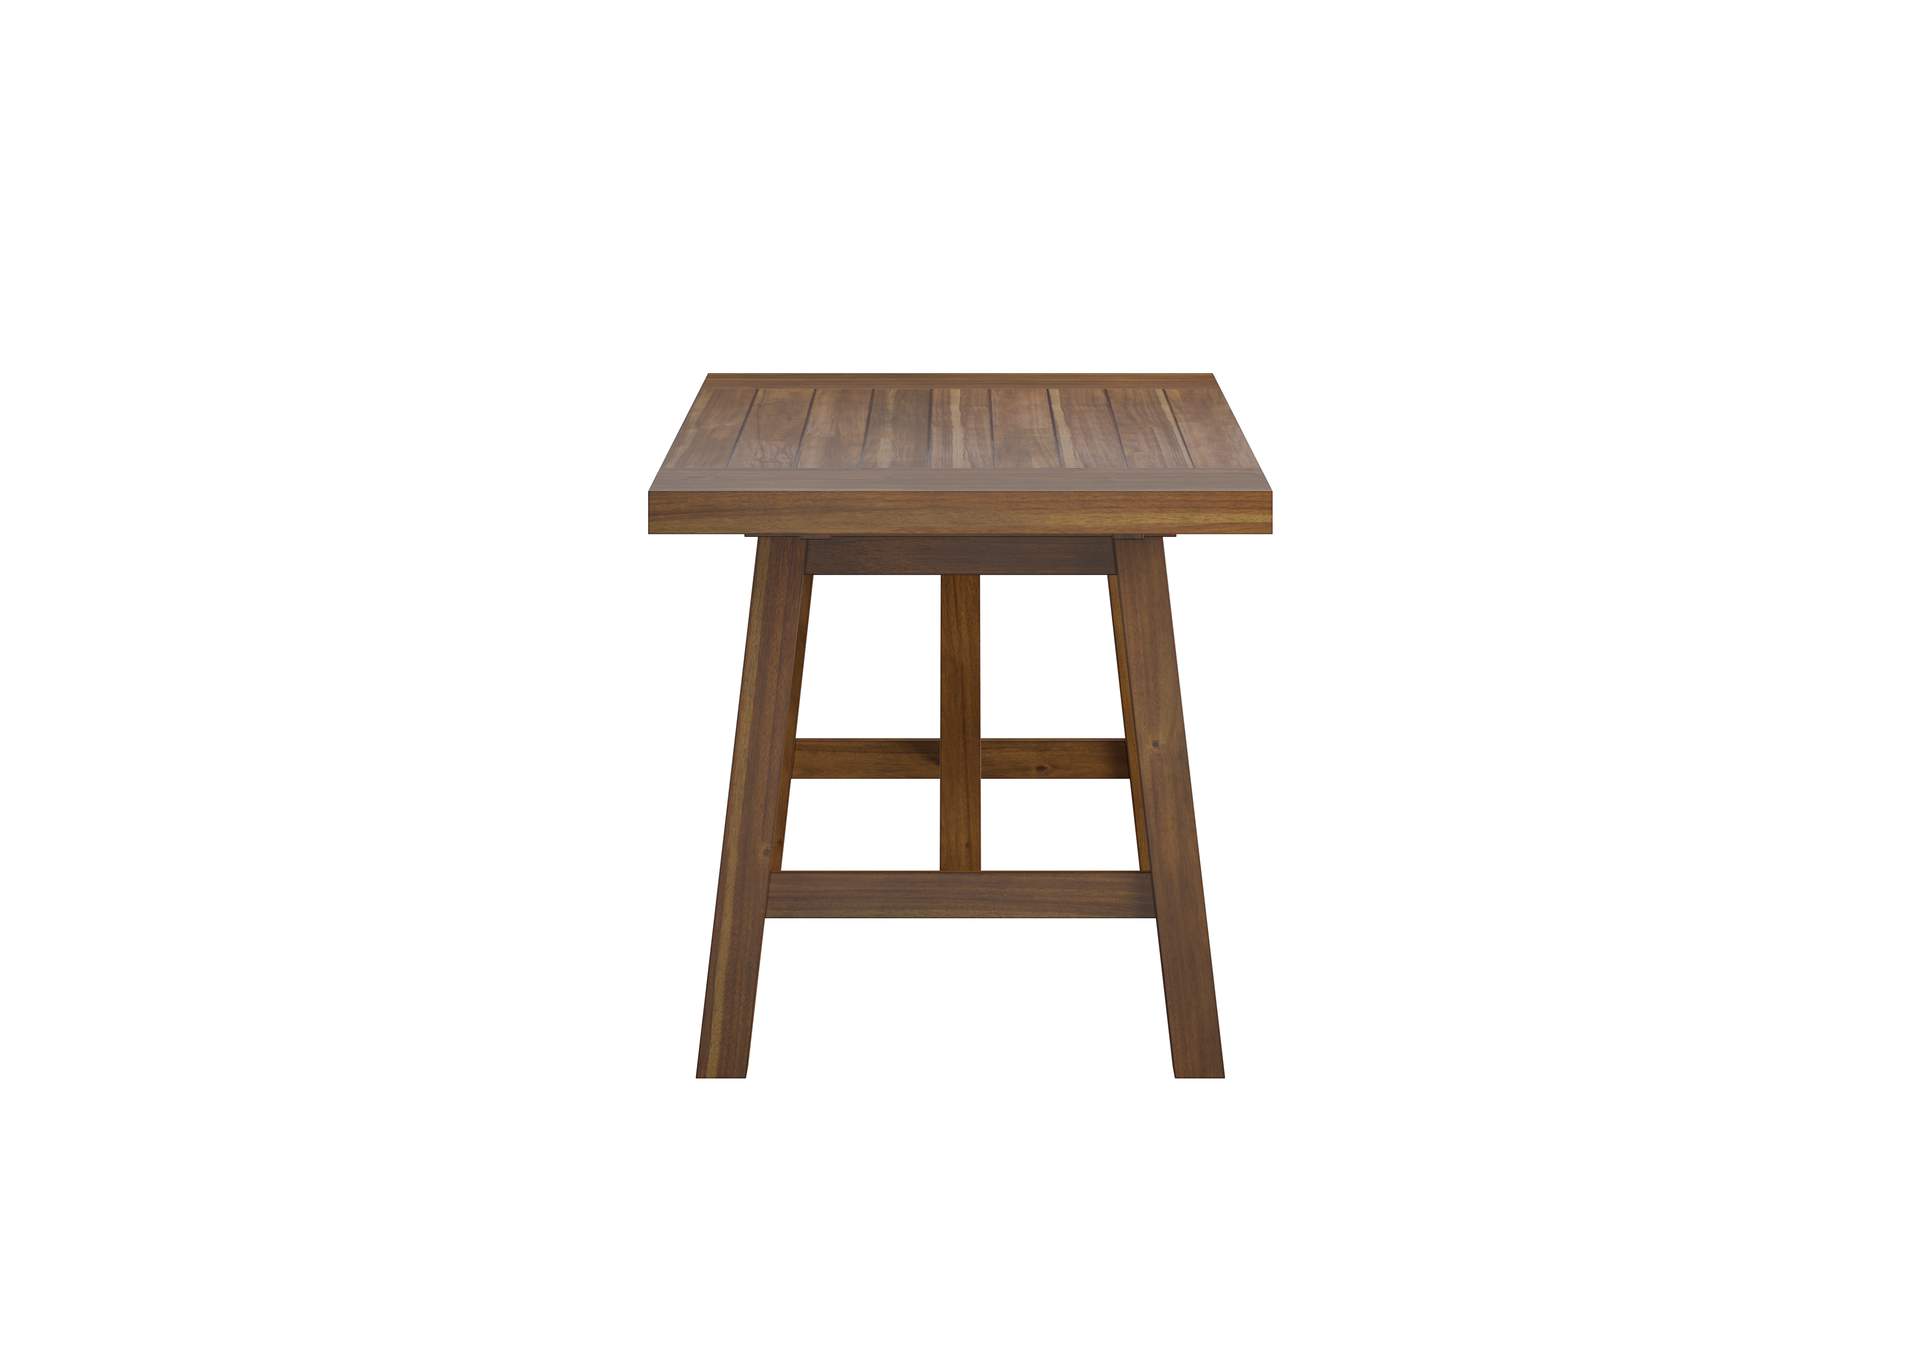 Darby Gathering Height Table,Emerald Home Furnishings